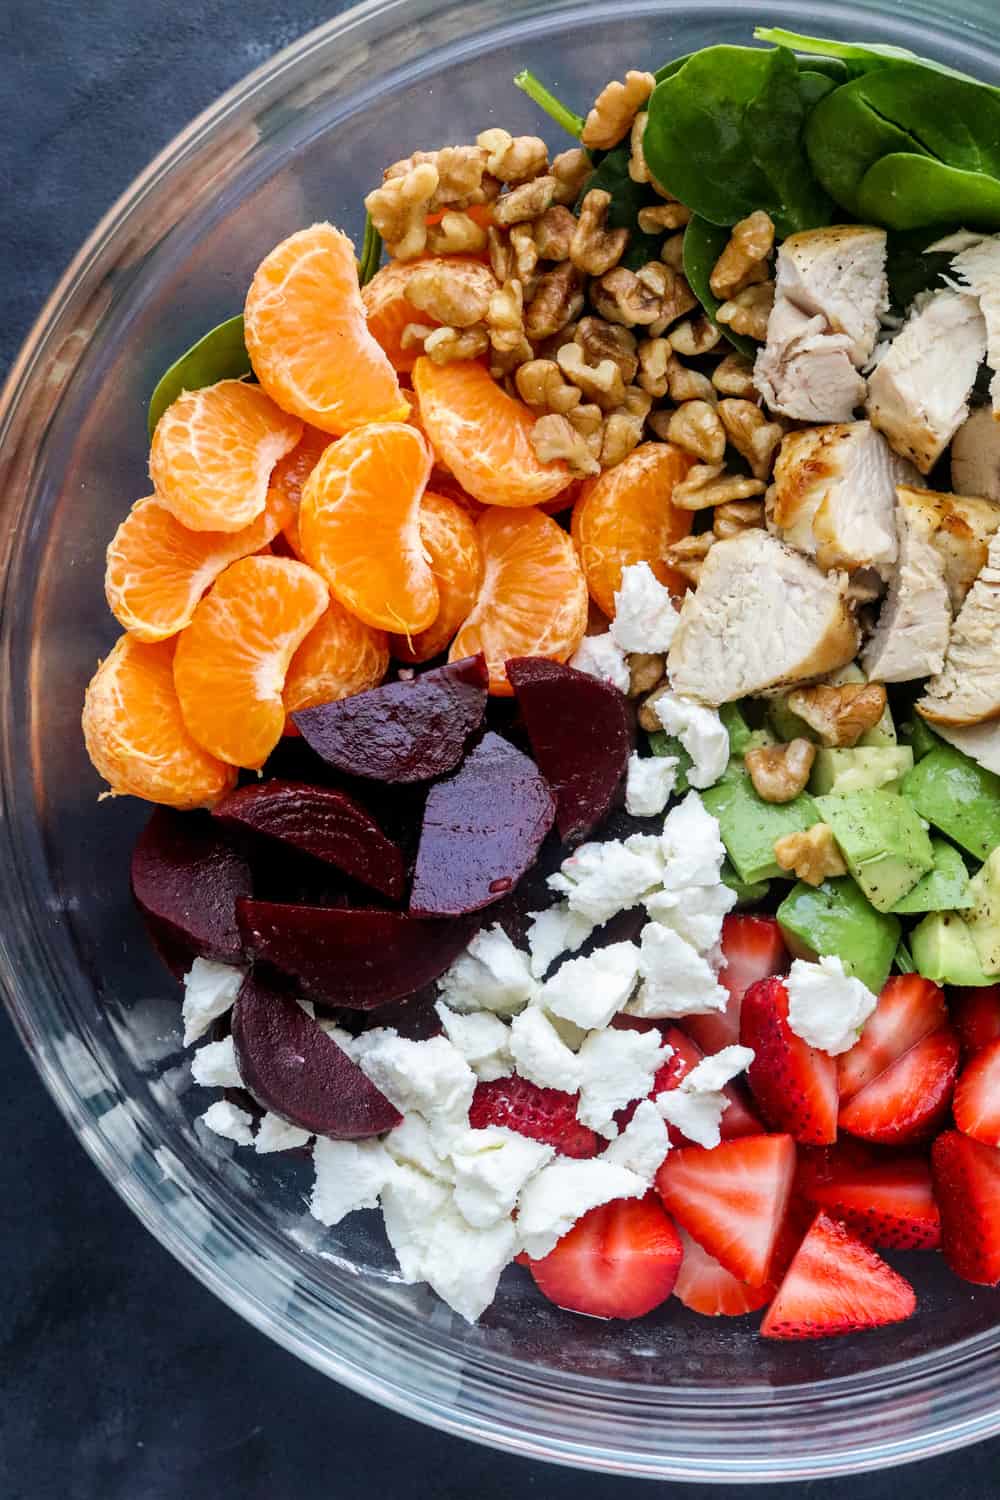 Spinach, clementines, chopped chicken breast, sliced beets, strawberries, avocado and goat cheese in a round glass bowl on a dark blue surface. 